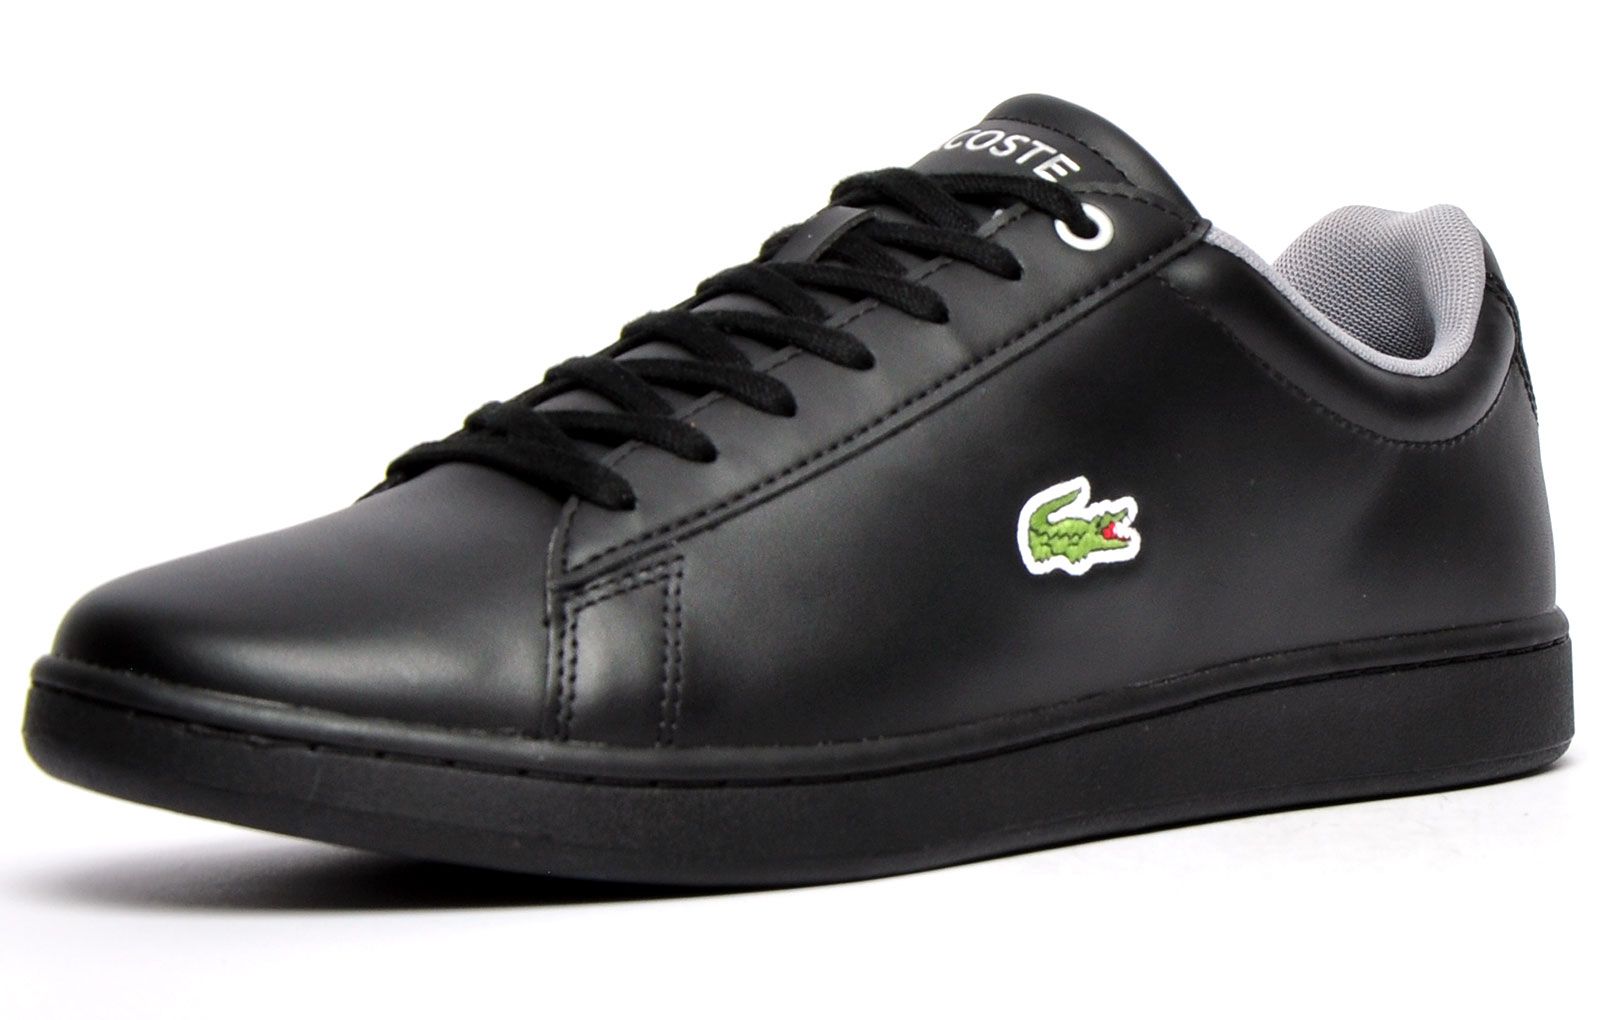 The Lacoste Hydez offers a luxurious choice that can transition from day to night. Featuring an all-black leather upper with complimentary grey padding around the collar, and finished with an Ortholite insole and lace up fastening for a secure fit, these Lacoste Hydez trainers wont let you down. Their clean street-smart look, high quality construction, and iconic Lacoste branding, ensure these Hydez trainers are the perfect choice for a versatile trainer that can be worn for any occasion.
 - Premium leather upper
 - Ortholite insole keeps you feeling fresh and comfortable
 - Cushioned ankle and heel padding
 - Lace up fastening for a secure fit
 - Durable rubber outsole
 - Iconic Lacoste branding throughout
 Please Note: 
 These Lacoste trainers are sold as B grades which means there may be some very slight cosmetic issues on the shoe and they come in a Lacoste box with the Lacoste brand authenticity details attached to it. We have checked every pair of these shoes and in our opinion at these heavily reduced prices all are very saleable. All shoes are guaranteed against fair wear and tear and offer a substantial saving against the normal high street price. The overall function or performance of the shoe will not be affected by cosmetic issues. B Grades are original authentic products released by the brand manufacturer with their approval at greatly reduced prices. If you are unhappy with your purchase we will be more than happy to take the shoes back from you and issue a full refund.